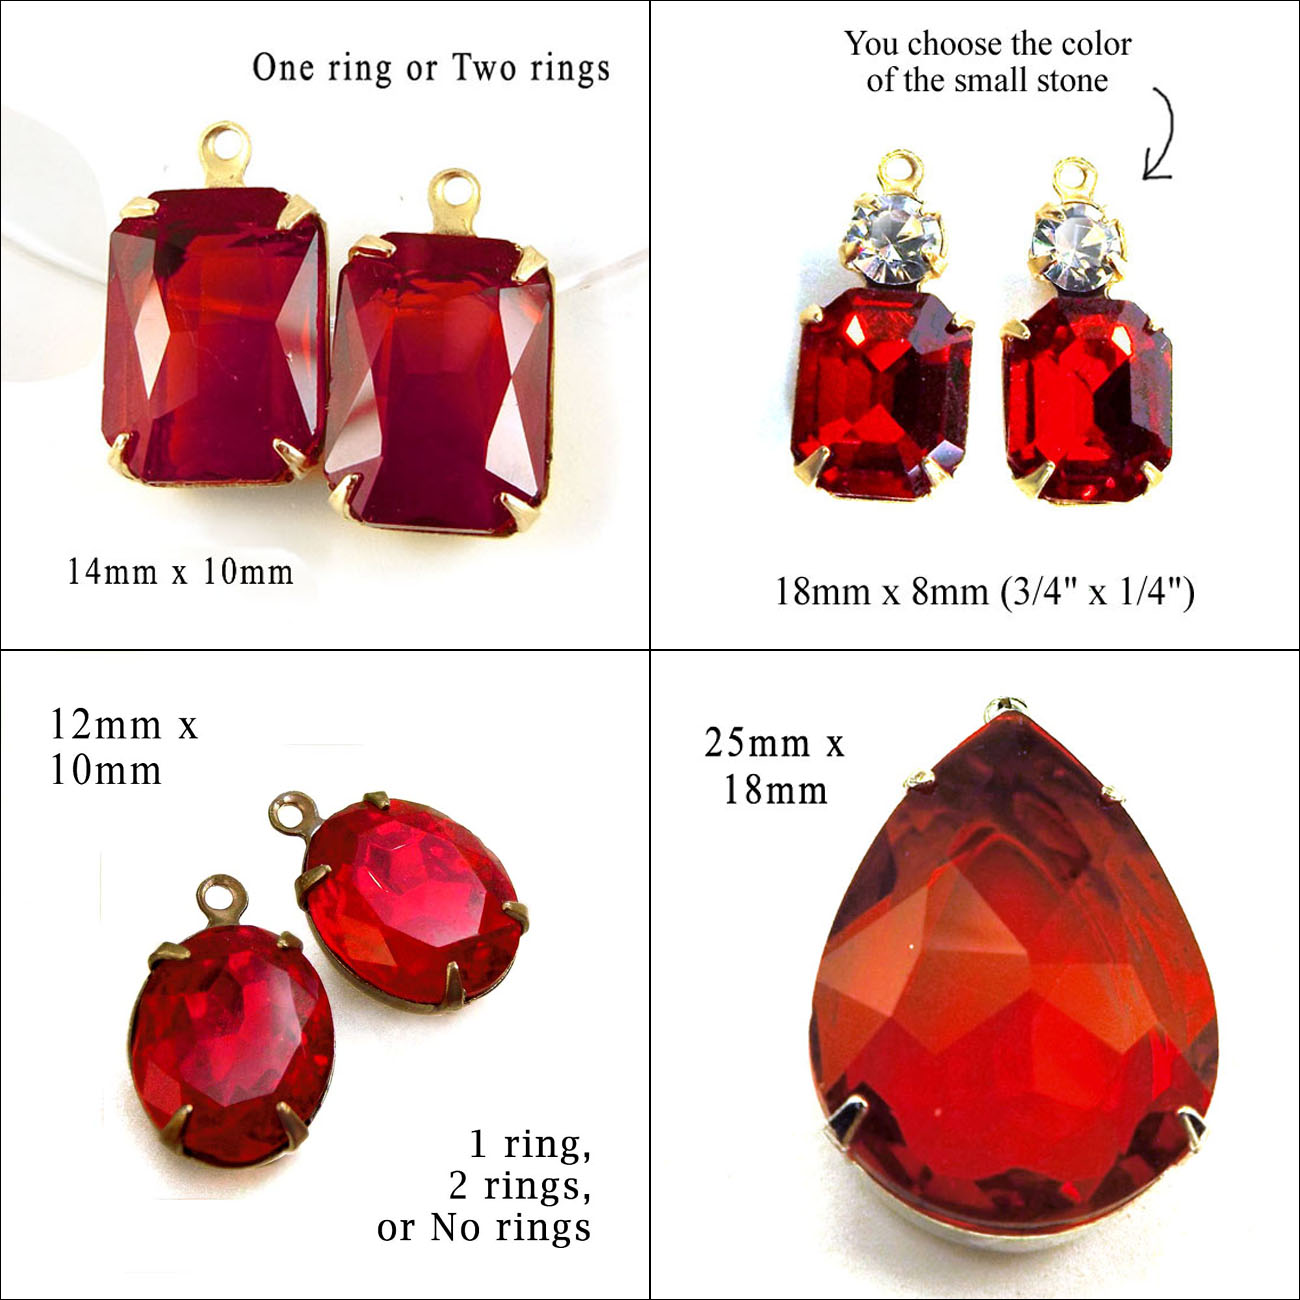 ruby red glass gems available at weekendjewelry1 on etsy